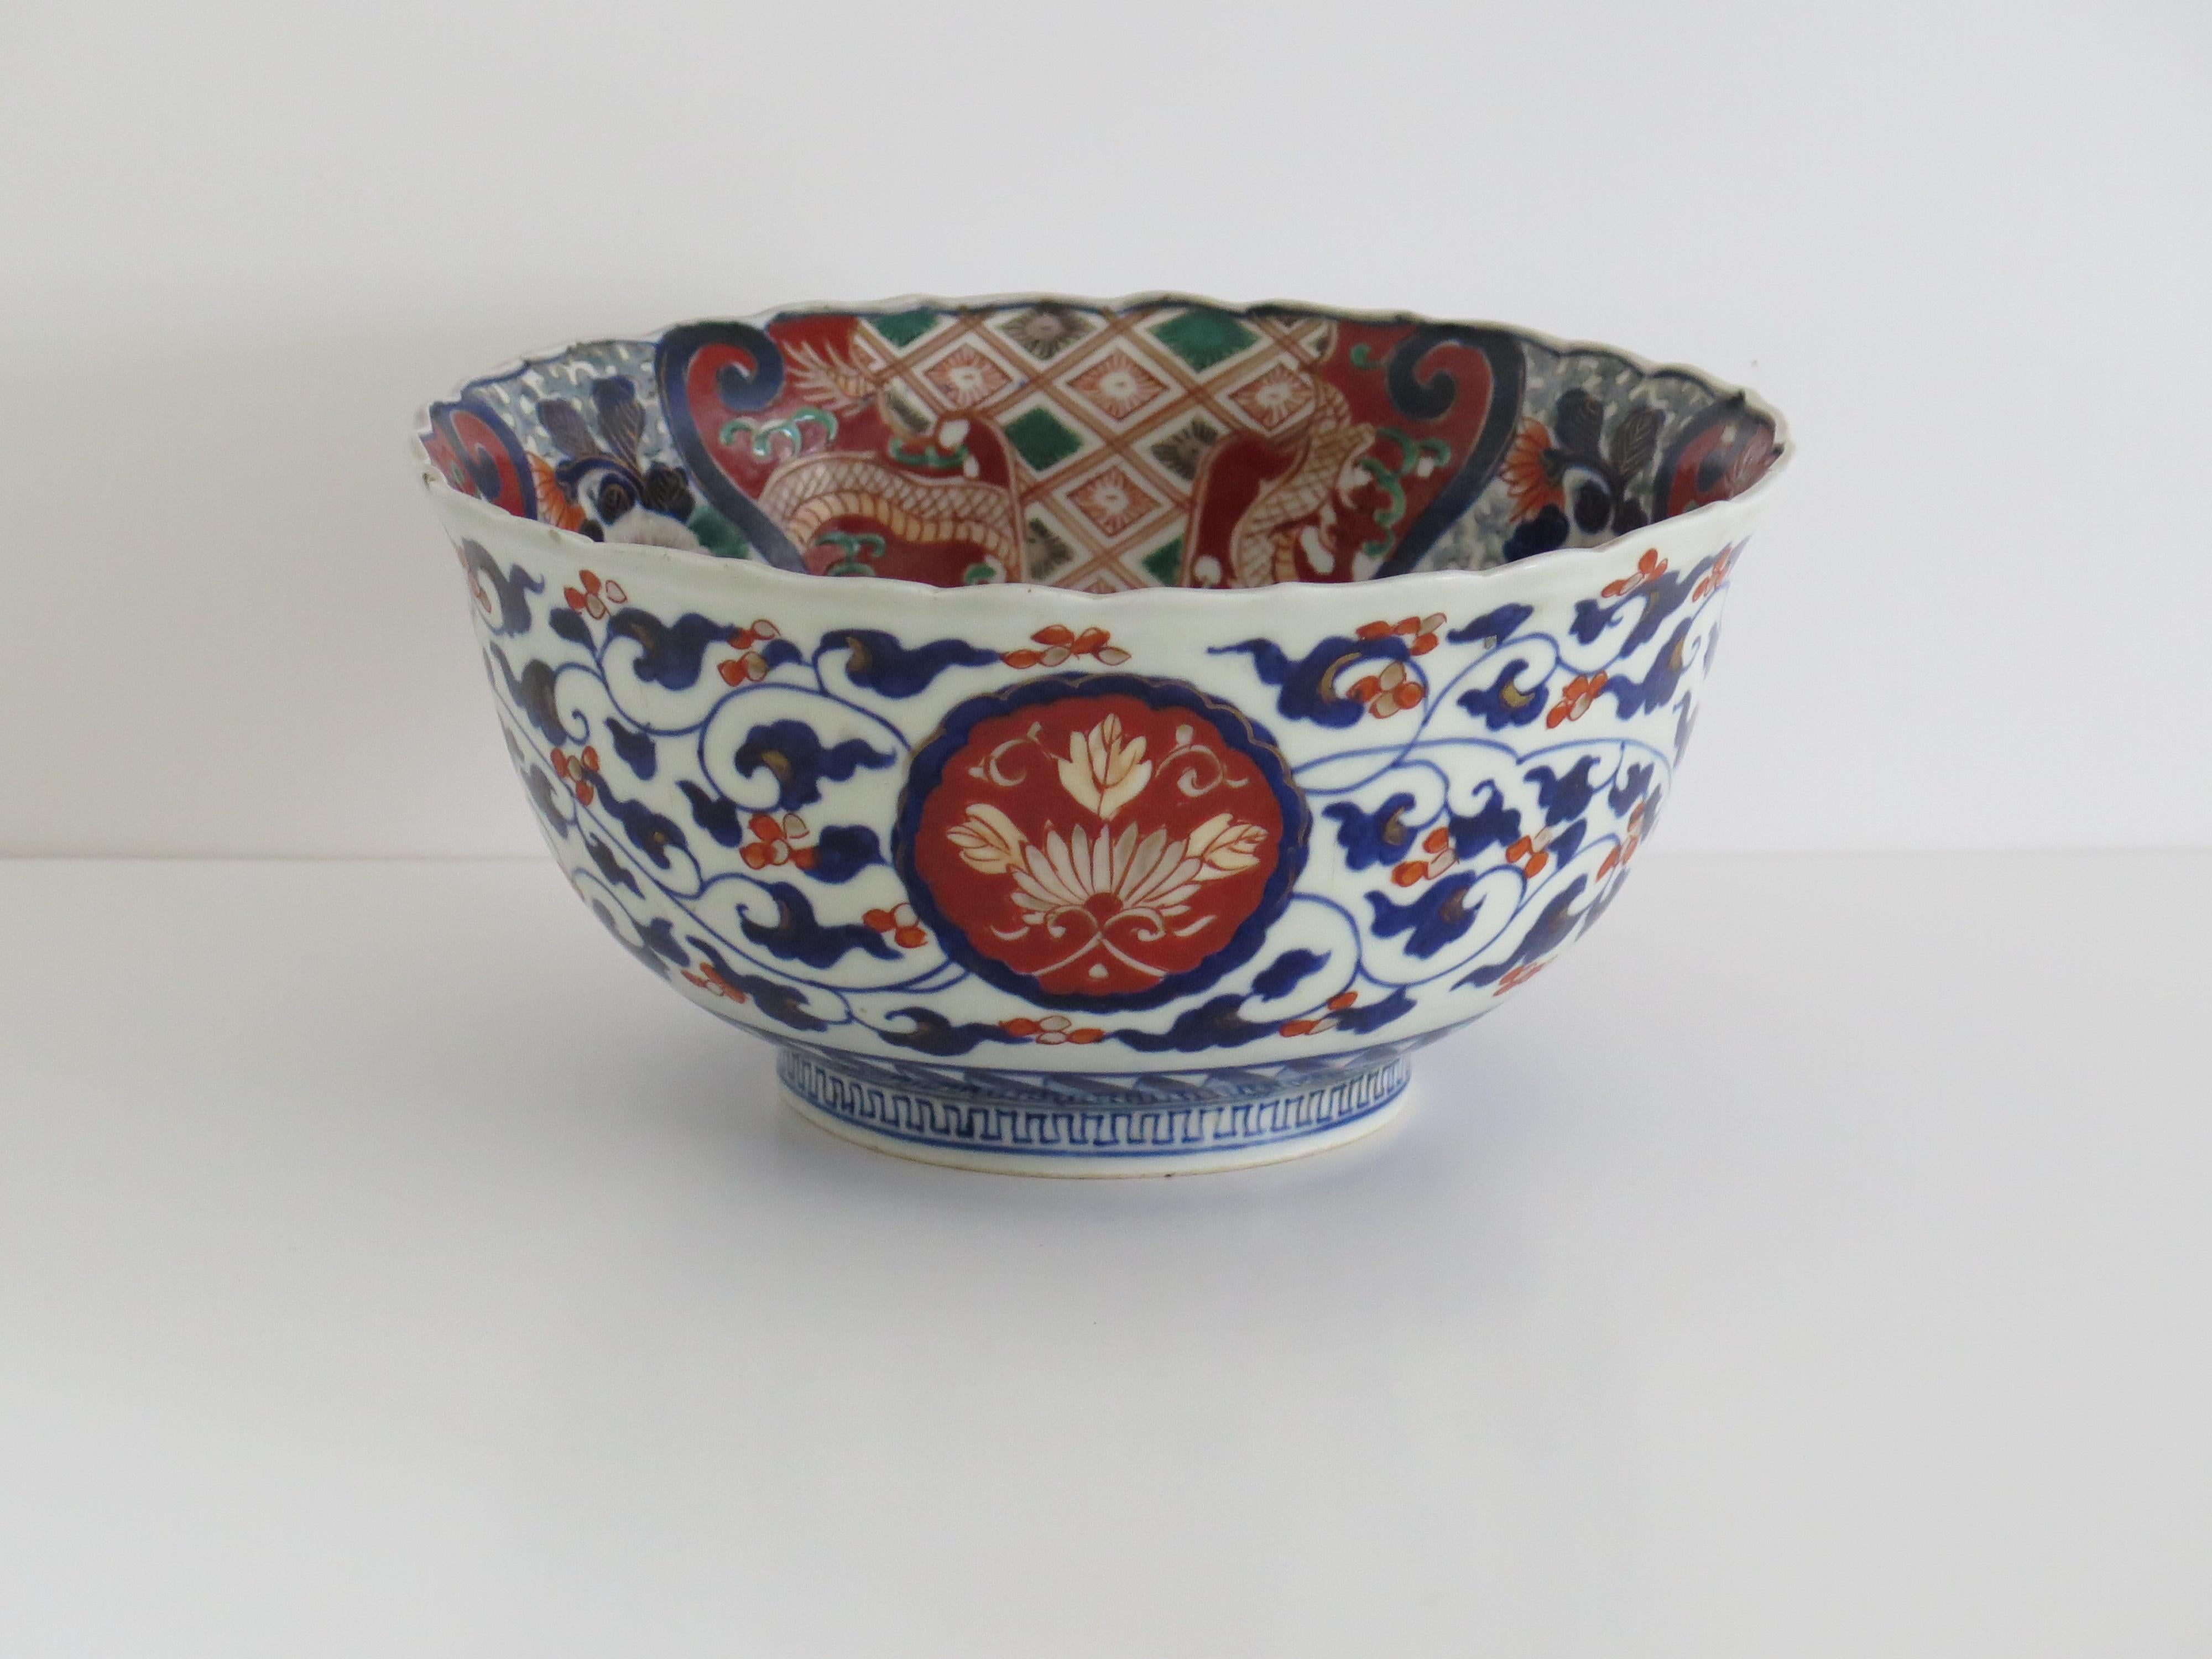 This is a good and very decorative porcelain footed deep bowl, hand-painted in polychrome enamels and dating to the second half of the 19th century, circa 1860, Meiji period.

The bowl is well hand potted with a circular deep shape, on a low